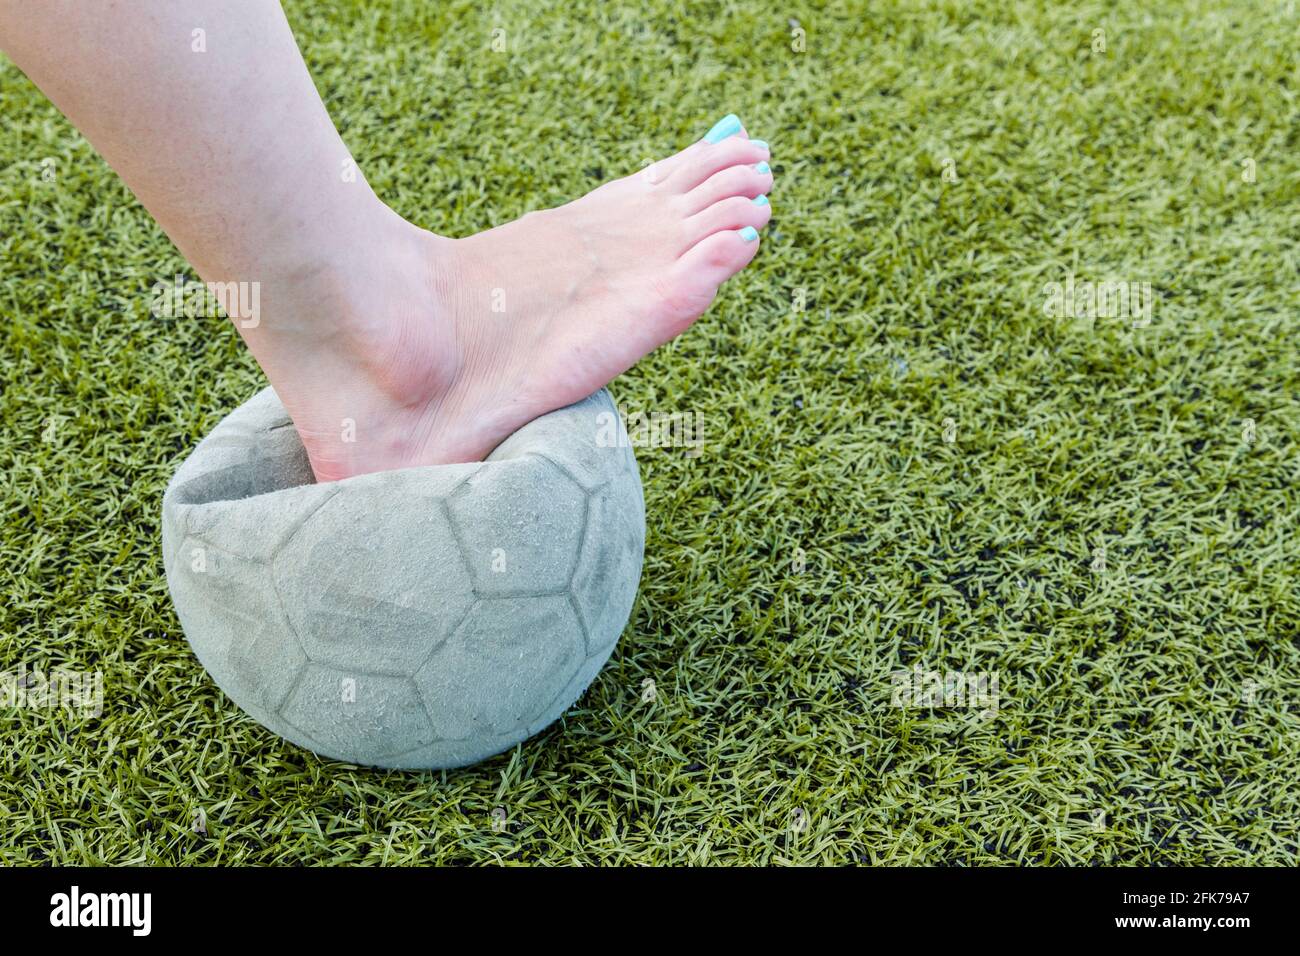 Girl Barefoot and old soccer ball background Stock Photo